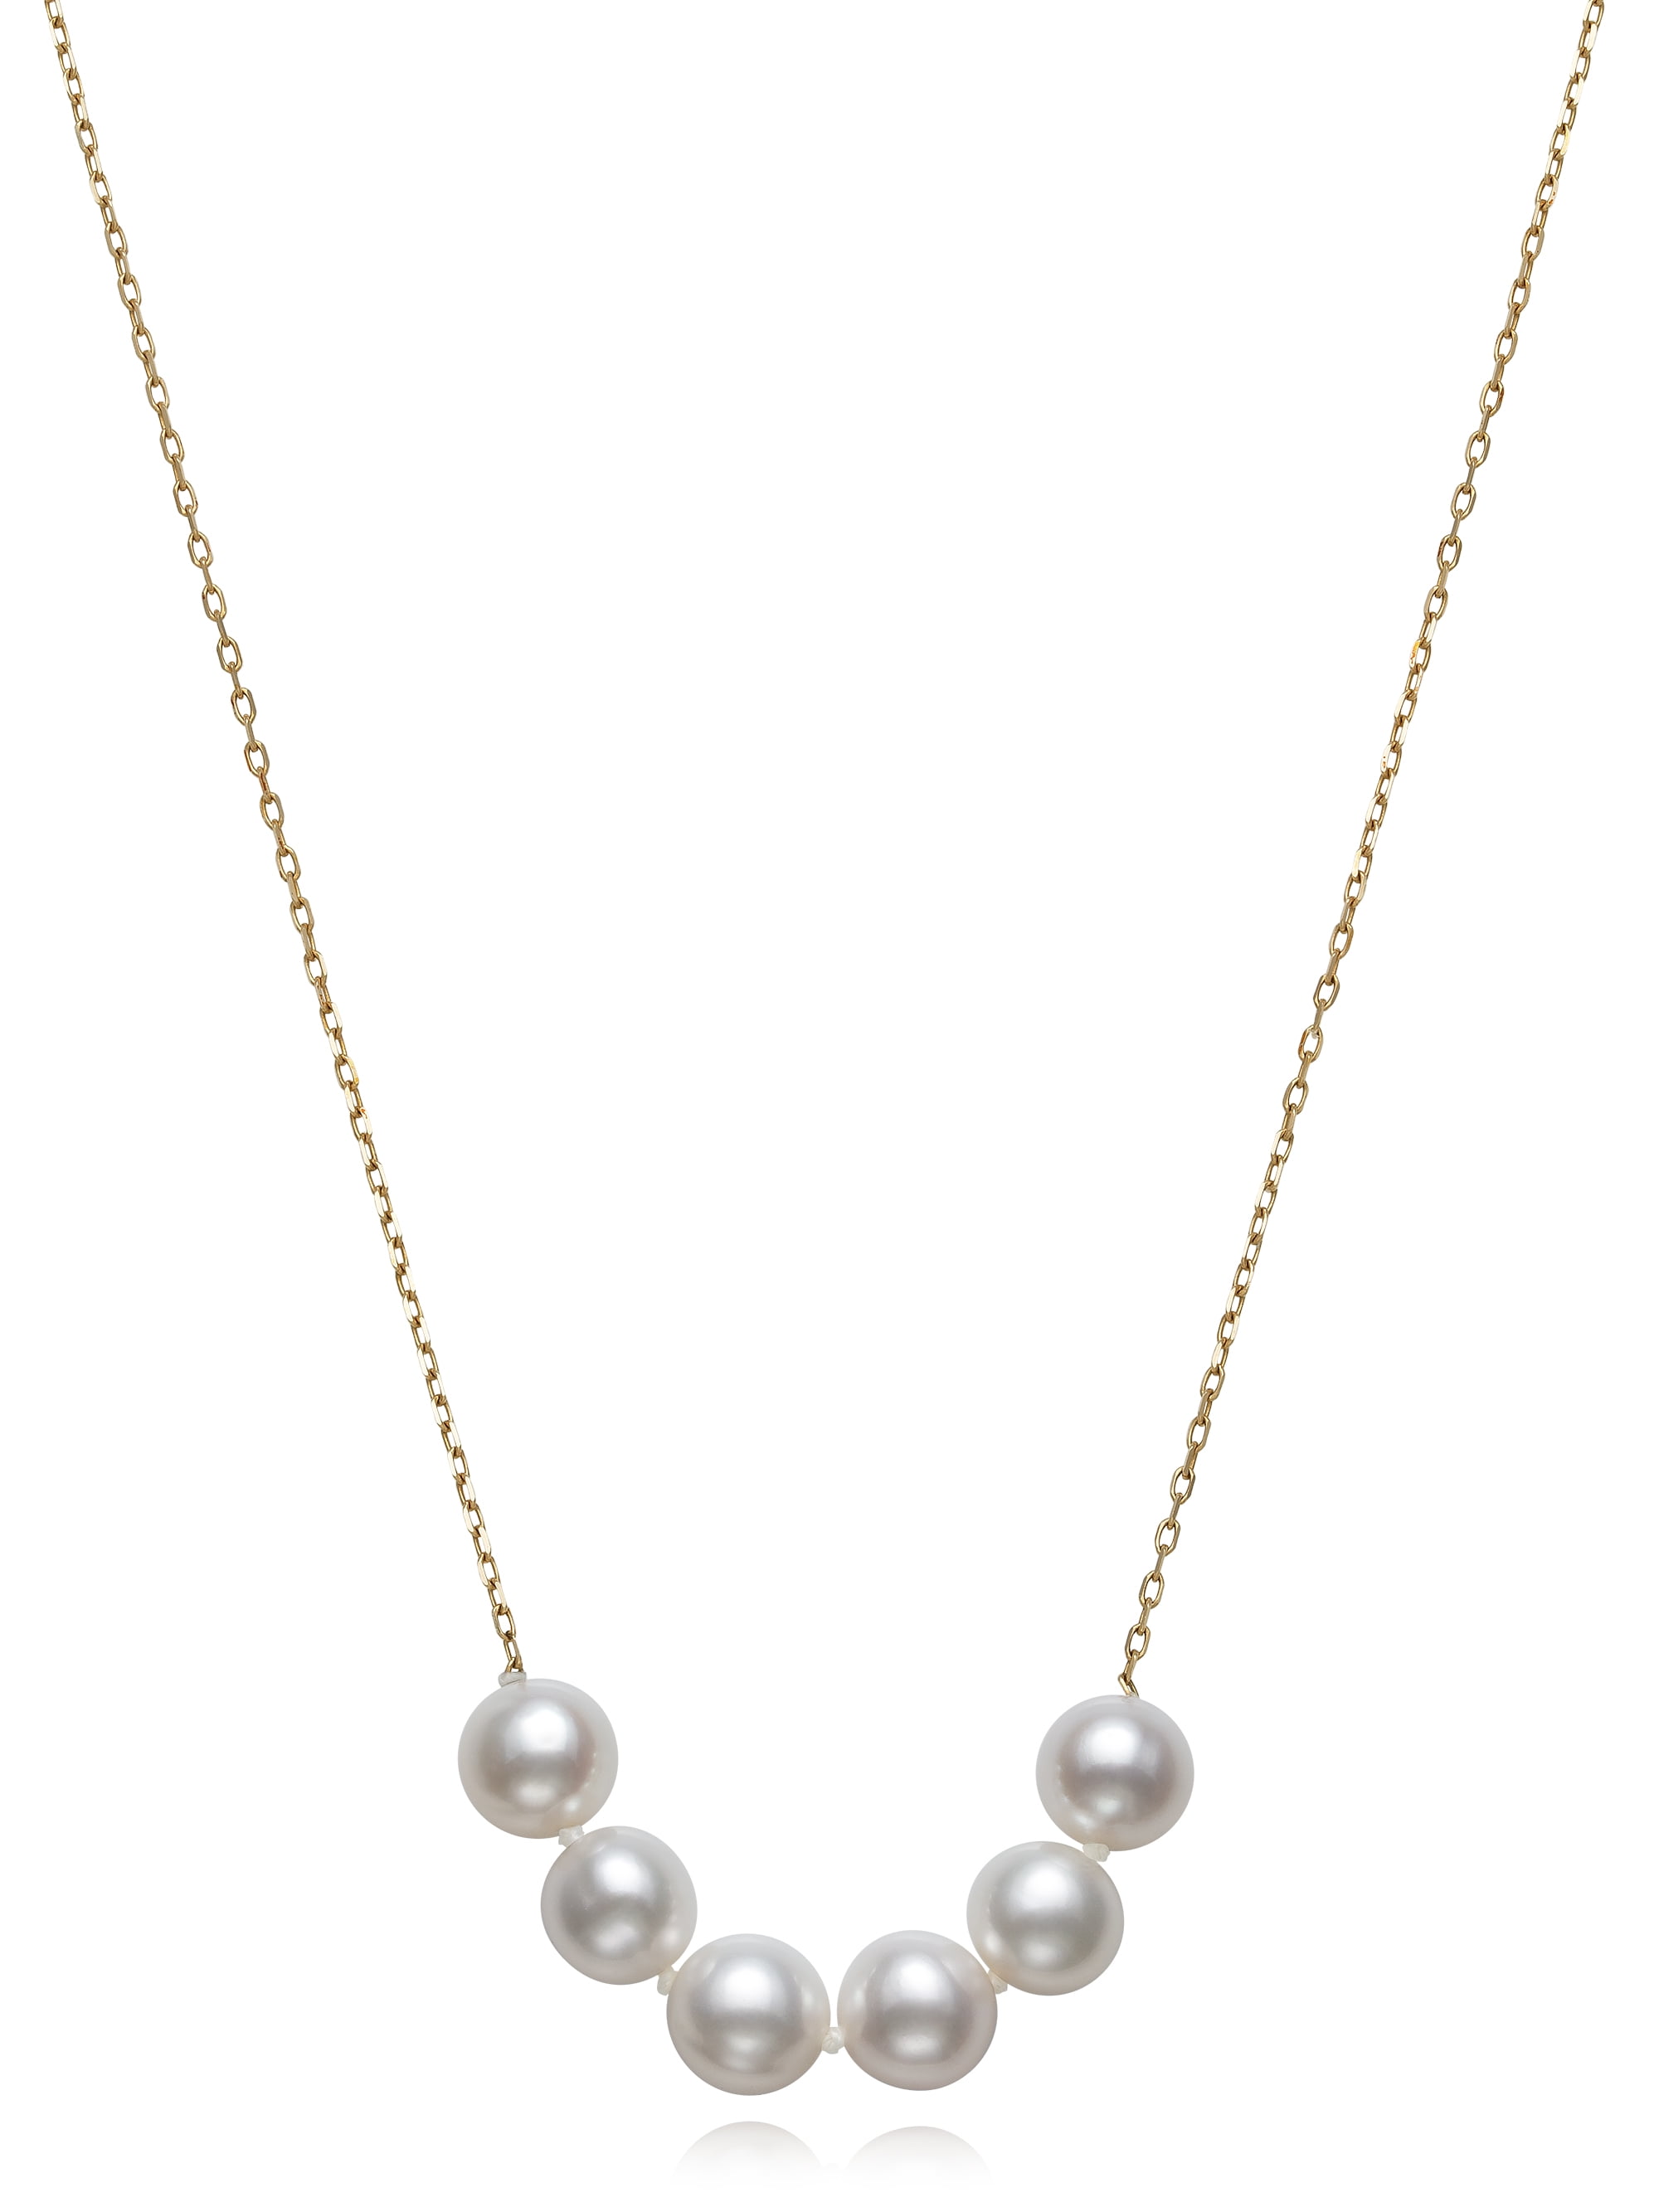 Necklace in Black and White pearls